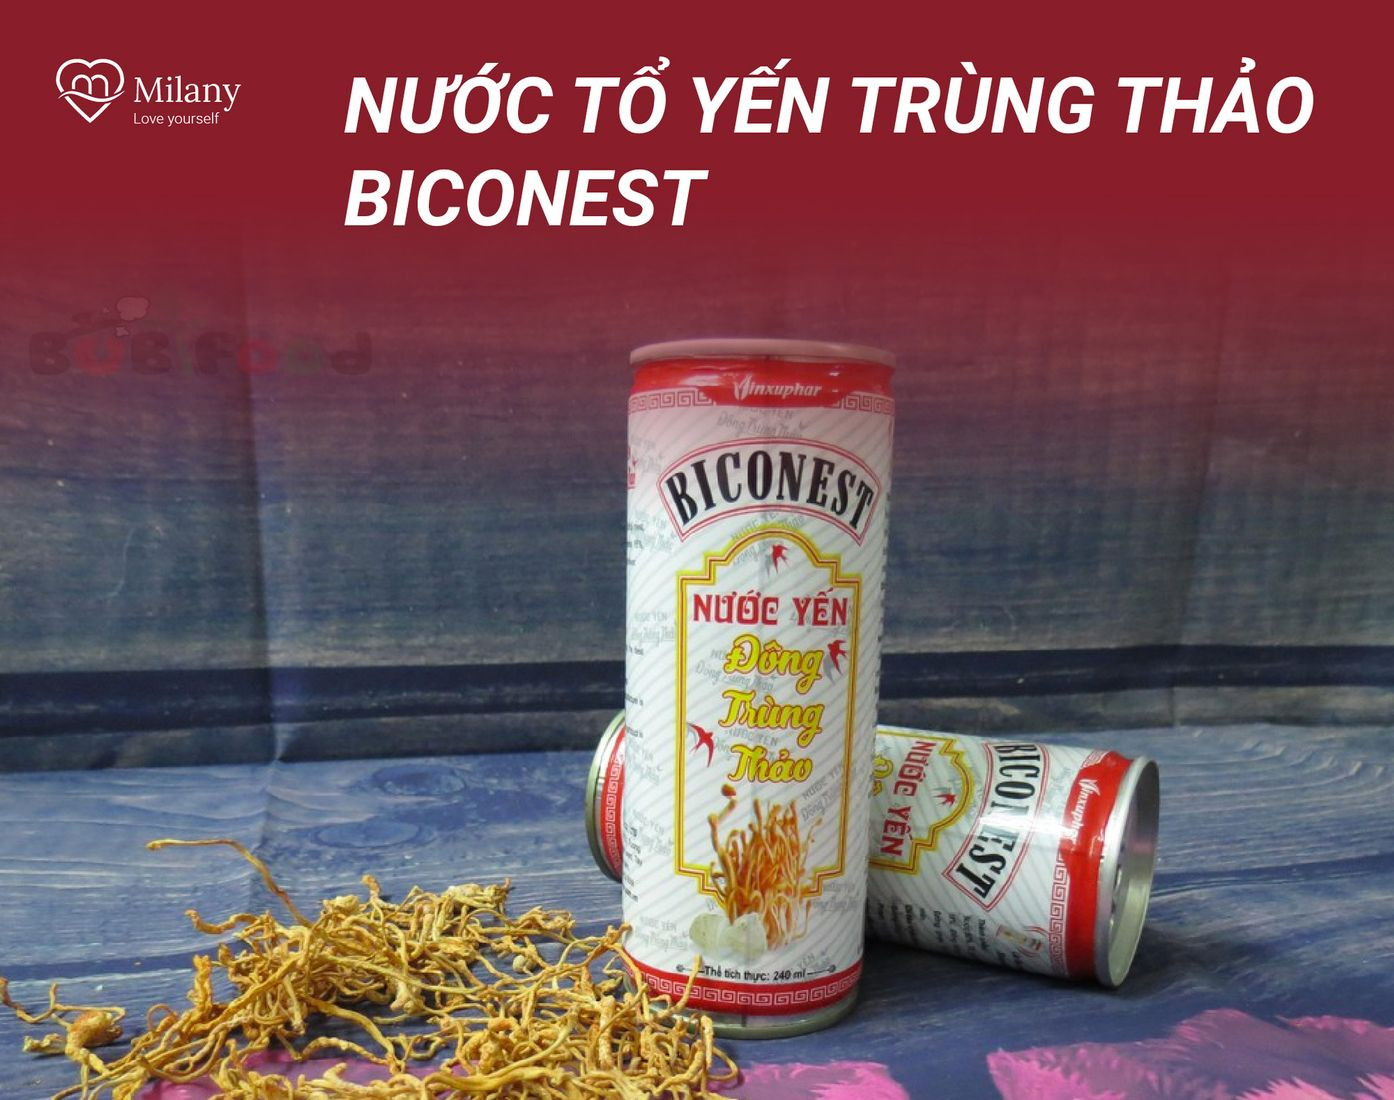 nuoc to yen trung thao biconest